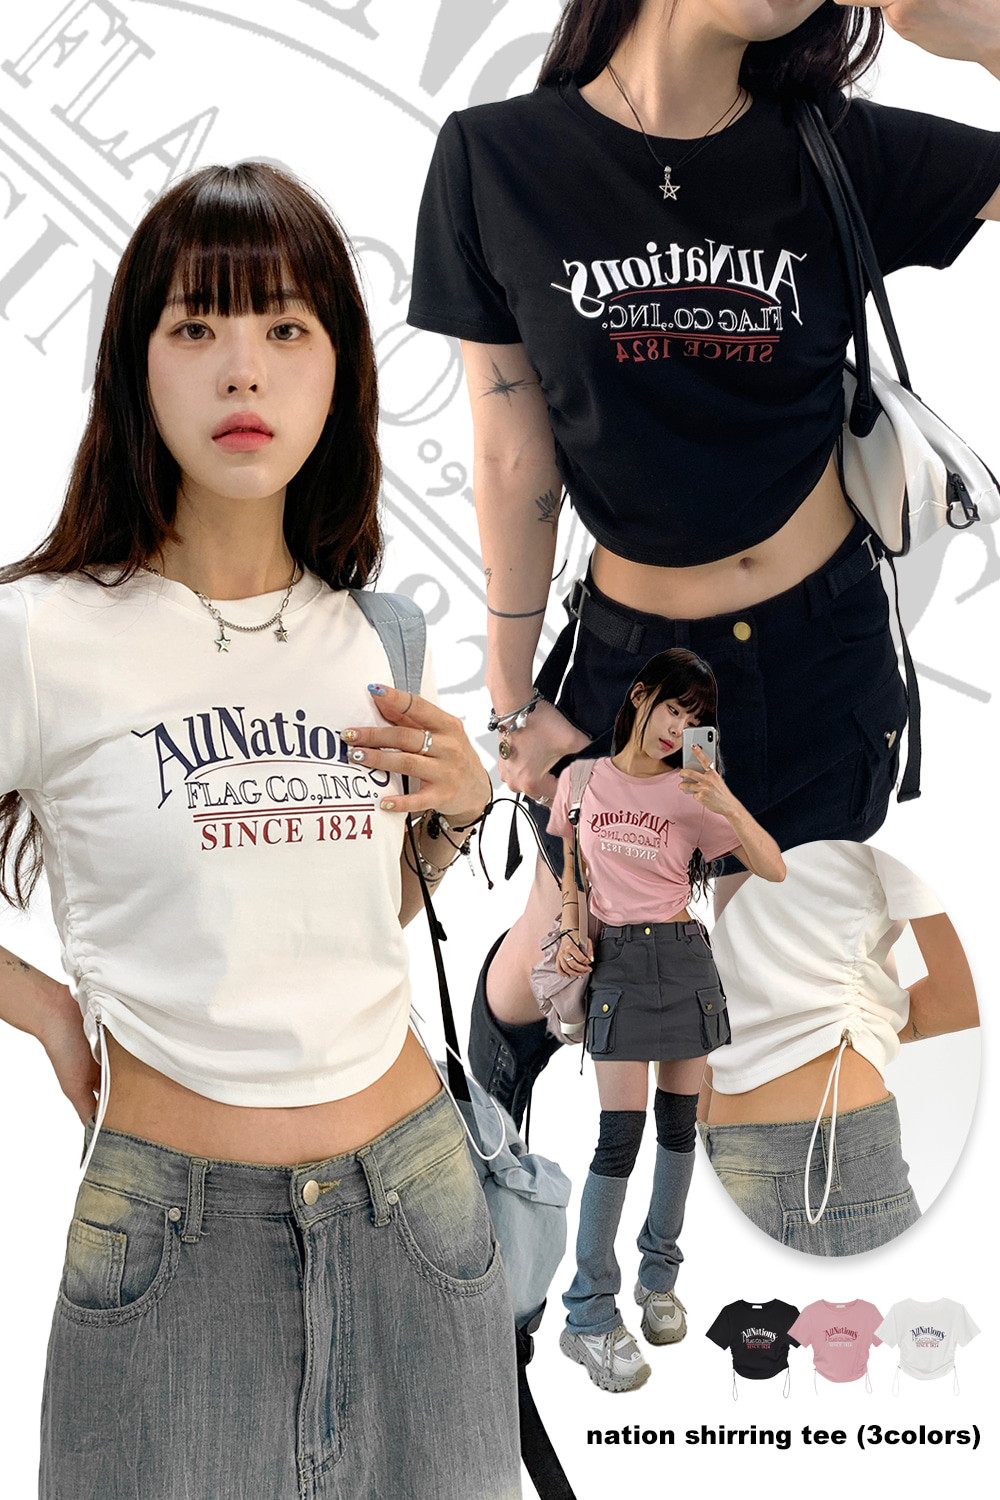 nation shirring tee (3colors)